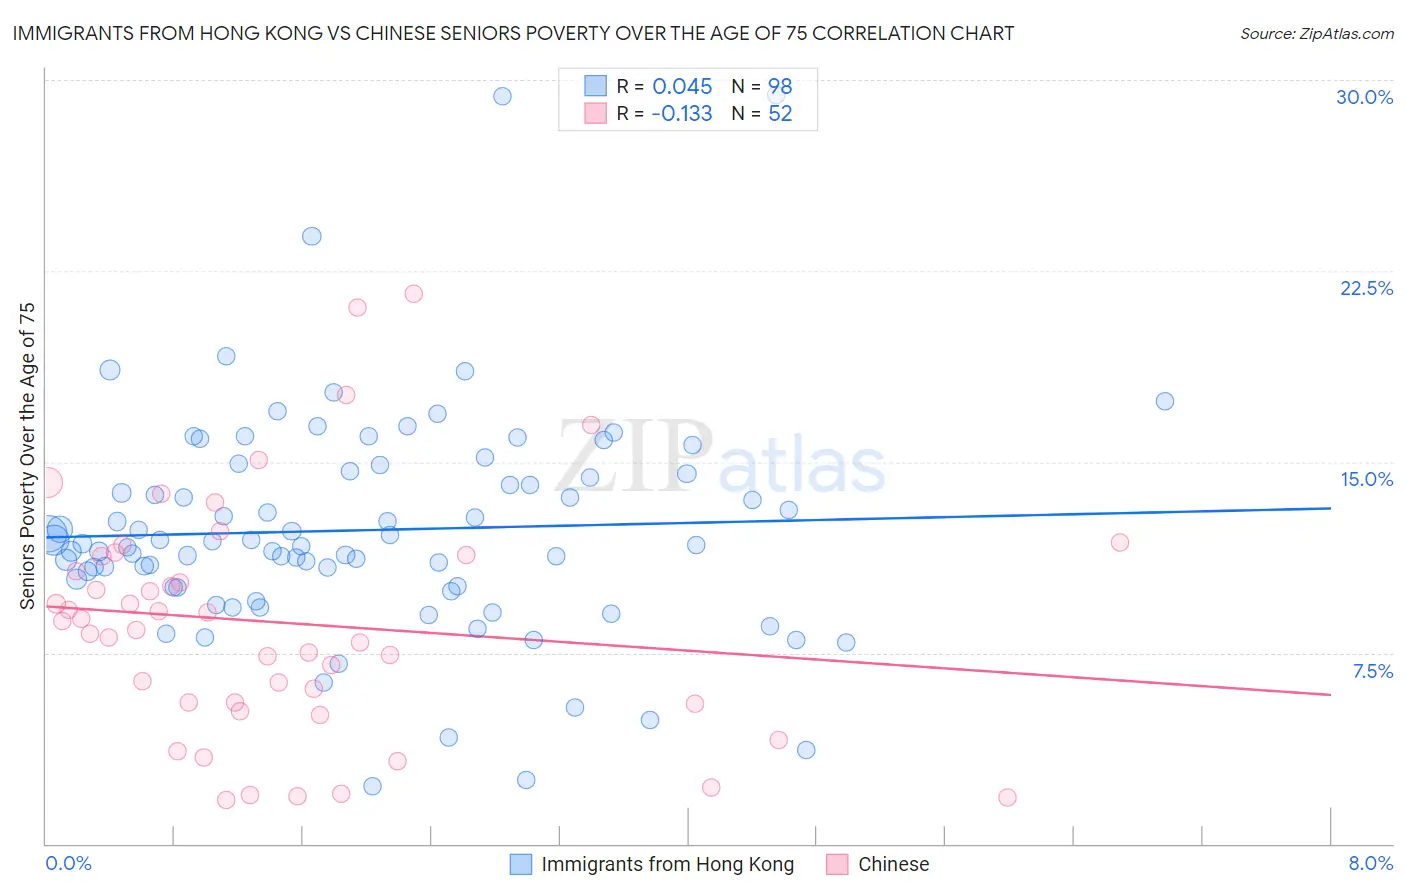 Immigrants from Hong Kong vs Chinese Seniors Poverty Over the Age of 75